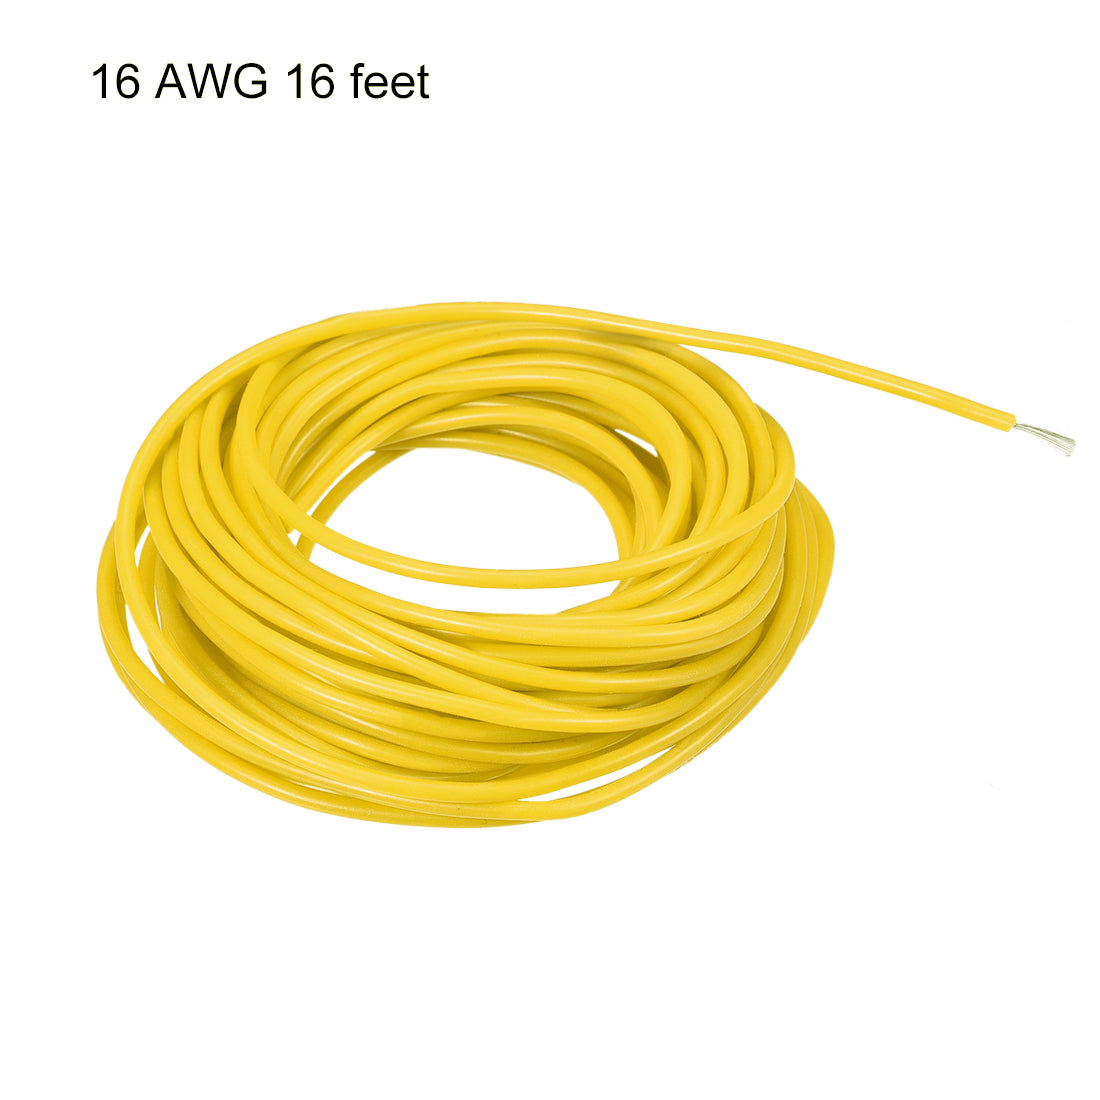 uxcell Uxcell Silicone Wire 16 AWG Electric Wire Strands of Tinned Copper Wire 16 ft Yellow